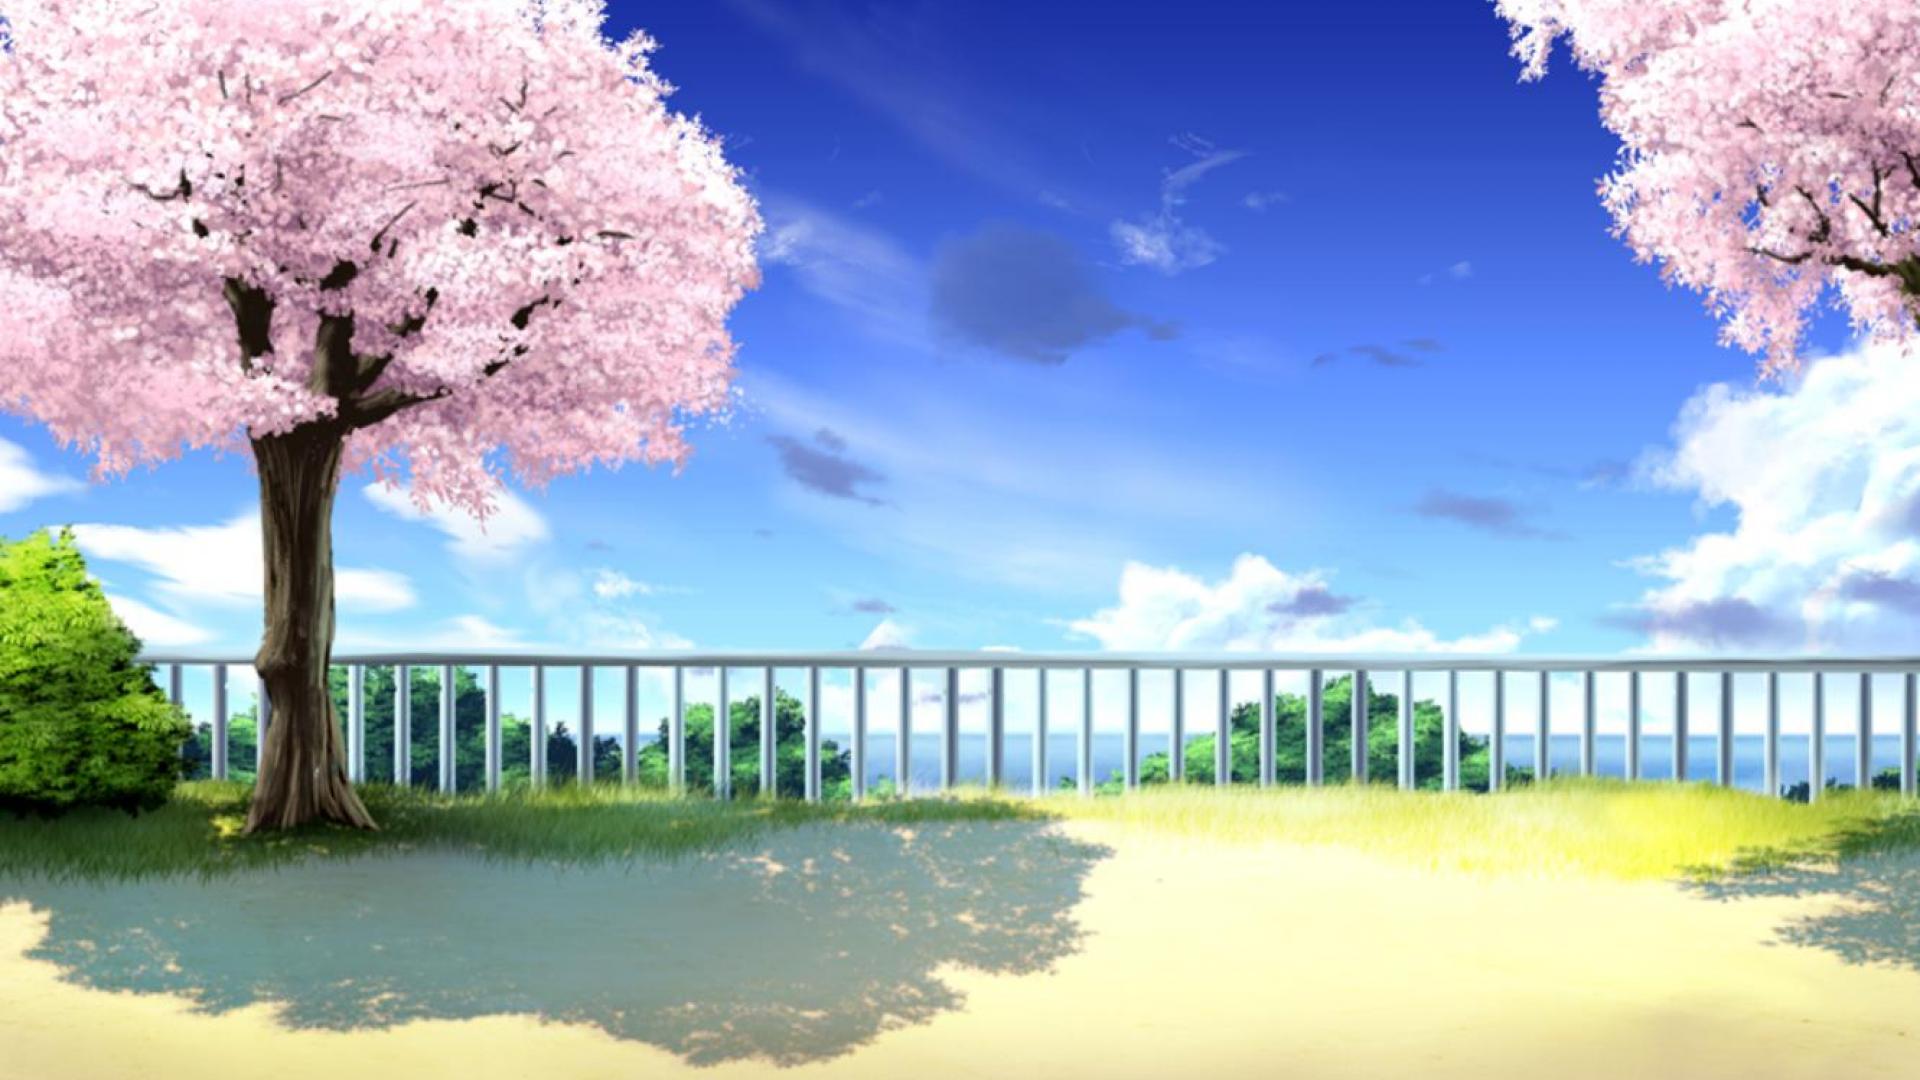 128,824 Anime Background Images, Stock Photos & Vectors | Shutterstock